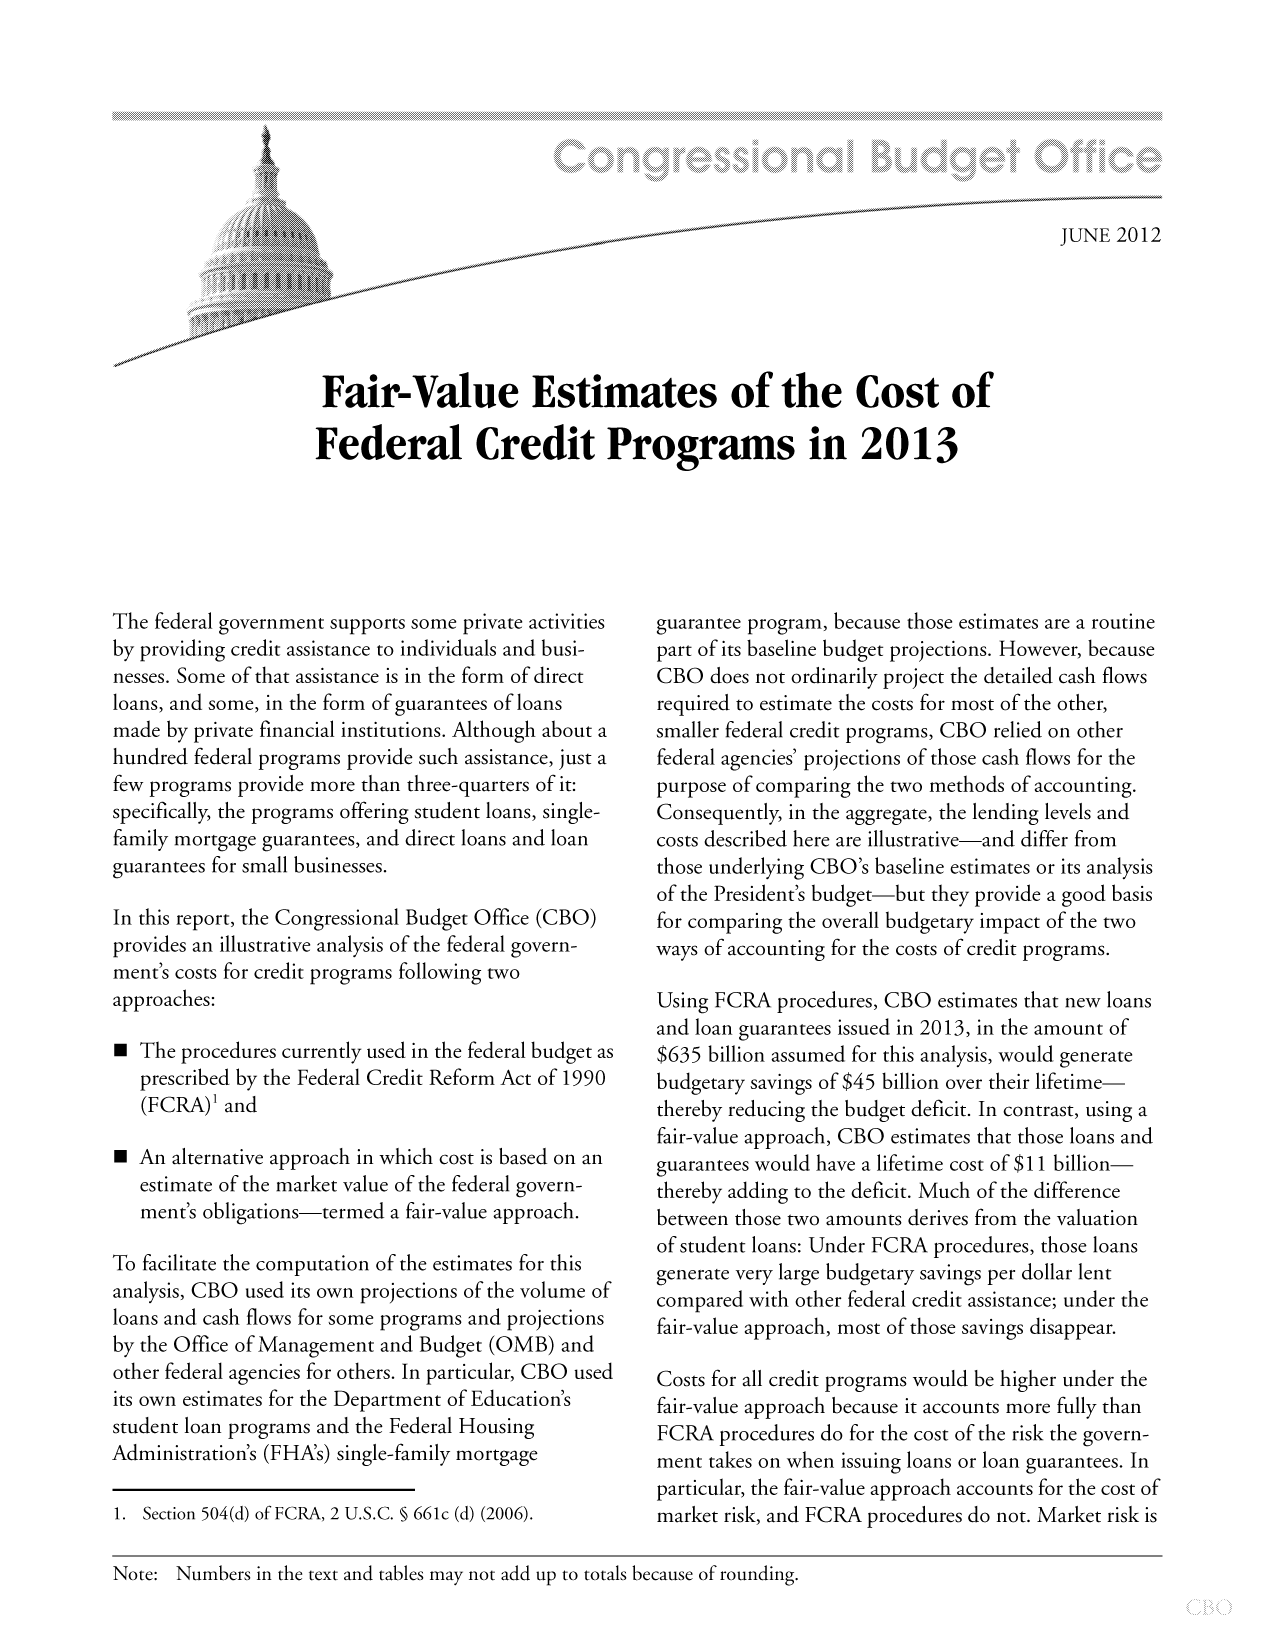 handle is hein.congrec/cbo10787 and id is 1 raw text is: JUNE 2012
Fair-Value Estimates of the Cost of
Federal Credit Programs in 2013

The federal government supports some private activities
by providing credit assistance to individuals and busi-
nesses. Some of that assistance is in the form of direct
loans, and some, in the form of guarantees of loans
made by private financial institutions. Although about a
hundred federal programs provide such assistance, just a
few programs provide more than three-quarters of it:
specifically, the programs offering student loans, single-
family mortgage guarantees, and direct loans and loan
guarantees for small businesses.
In this report, the Congressional Budget Office (CBO)
provides an illustrative analysis of the federal govern-
ment's costs for credit programs following two
approaches:
 The procedures currently used in the federal budget as
prescribed by the Federal Credit Reform Act of 1990
(FCRA)' and
 An alternative approach in which cost is based on an
estimate of the market value of the federal govern-
ment's obligations-termed a fair-value approach.
To facilitate the computation of the estimates for this
analysis, CBO used its own projections of the volume of
loans and cash flows for some programs and projections
by the Office of Management and Budget (OMB) and
other federal agencies for others. In particular, CBO used
its own estimates for the Department of Education's
student loan programs and the Federal Housing
Administration's (FHA's) single-family mortgage
1. Section 504(d) of FCRA, 2 U.S.C. § 661c (d) (2006).

guarantee program, because those estimates are a routine
part of its baseline budget projections. However, because
CBO does not ordinarily project the detailed cash flows
required to estimate the costs for most of the other,
smaller federal credit programs, CBO relied on other
federal agencies' projections of those cash flows for the
purpose of comparing the two methods of accounting.
Consequently, in the aggregate, the lending levels and
costs described here are illustrative-and differ from
those underlying CBO's baseline estimates or its analysis
of the President's budget-but they provide a good basis
for comparing the overall budgetary impact of the two
ways of accounting for the costs of credit programs.
Using FCRA procedures, CBO estimates that new loans
and loan guarantees issued in 2013, in the amount of
$635 billion assumed for this analysis, would generate
budgetary savings of $45 billion over their lifetime-
thereby reducing the budget deficit. In contrast, using a
fair-value approach, CBO estimates that those loans and
guarantees would have a lifetime cost of $11 billion
thereby adding to the deficit. Much of the difference
between those two amounts derives from the valuation
of student loans: Under FCRA procedures, those loans
generate very large budgetary savings per dollar lent
compared with other federal credit assistance; under the
fair-value approach, most of those savings disappear.
Costs for all credit programs would be higher under the
fair-value approach because it accounts more fully than
FCRA procedures do for the cost of the risk the govern-
ment takes on when issuing loans or loan guarantees. In
particular, the fair-value approach accounts for the cost of
market risk, and FCRA procedures do not. Market risk is

Note: Numbers in the text and tables may not add up to totals because of rounding.


